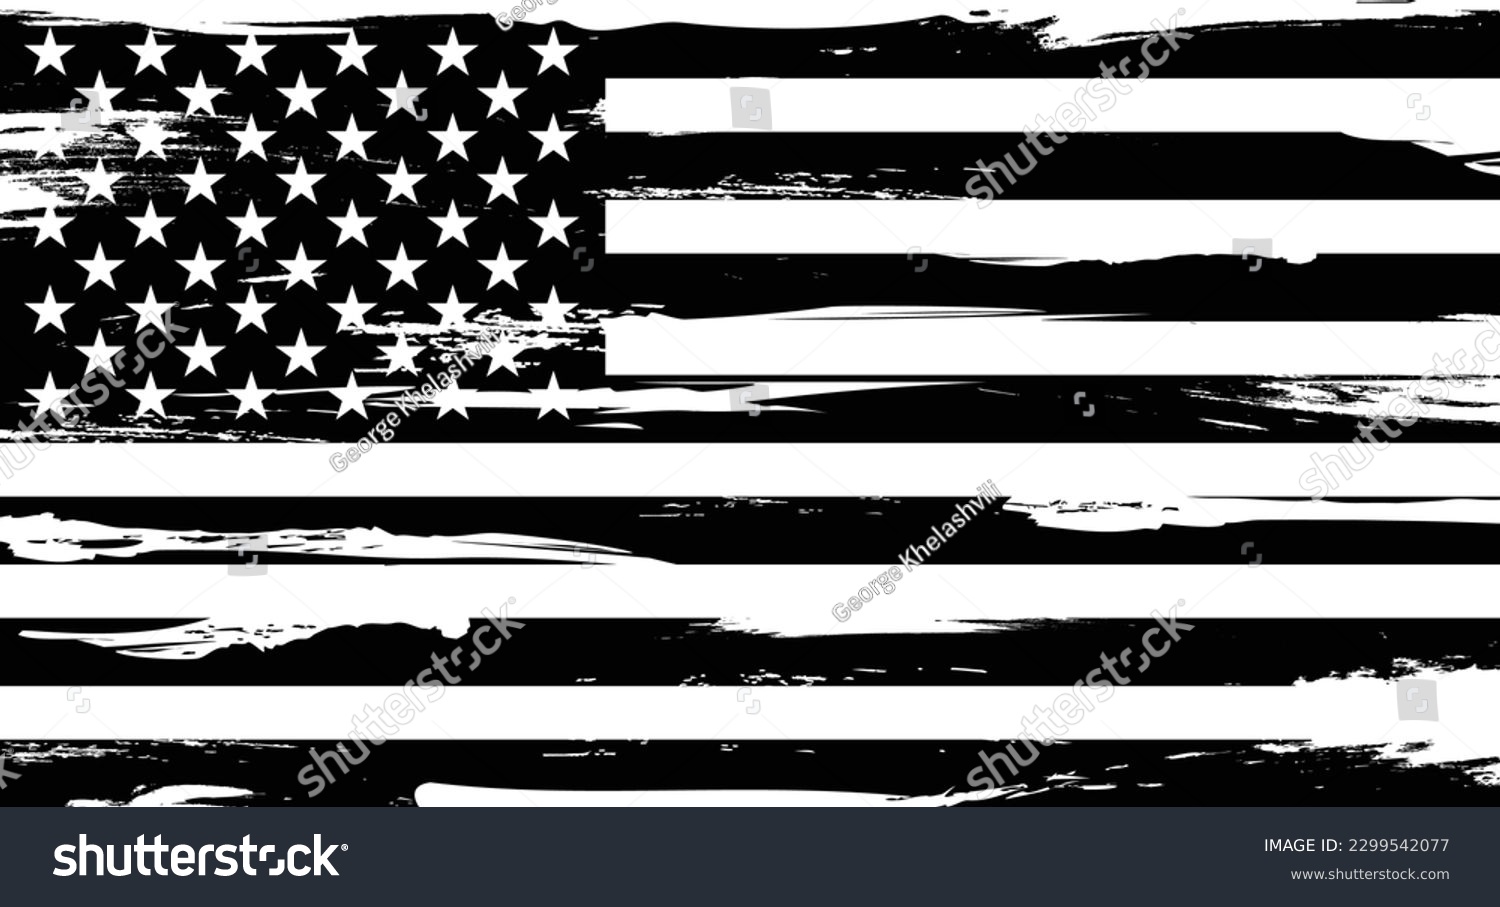 SVG of Vector Of The Distressed American Flag	
 svg